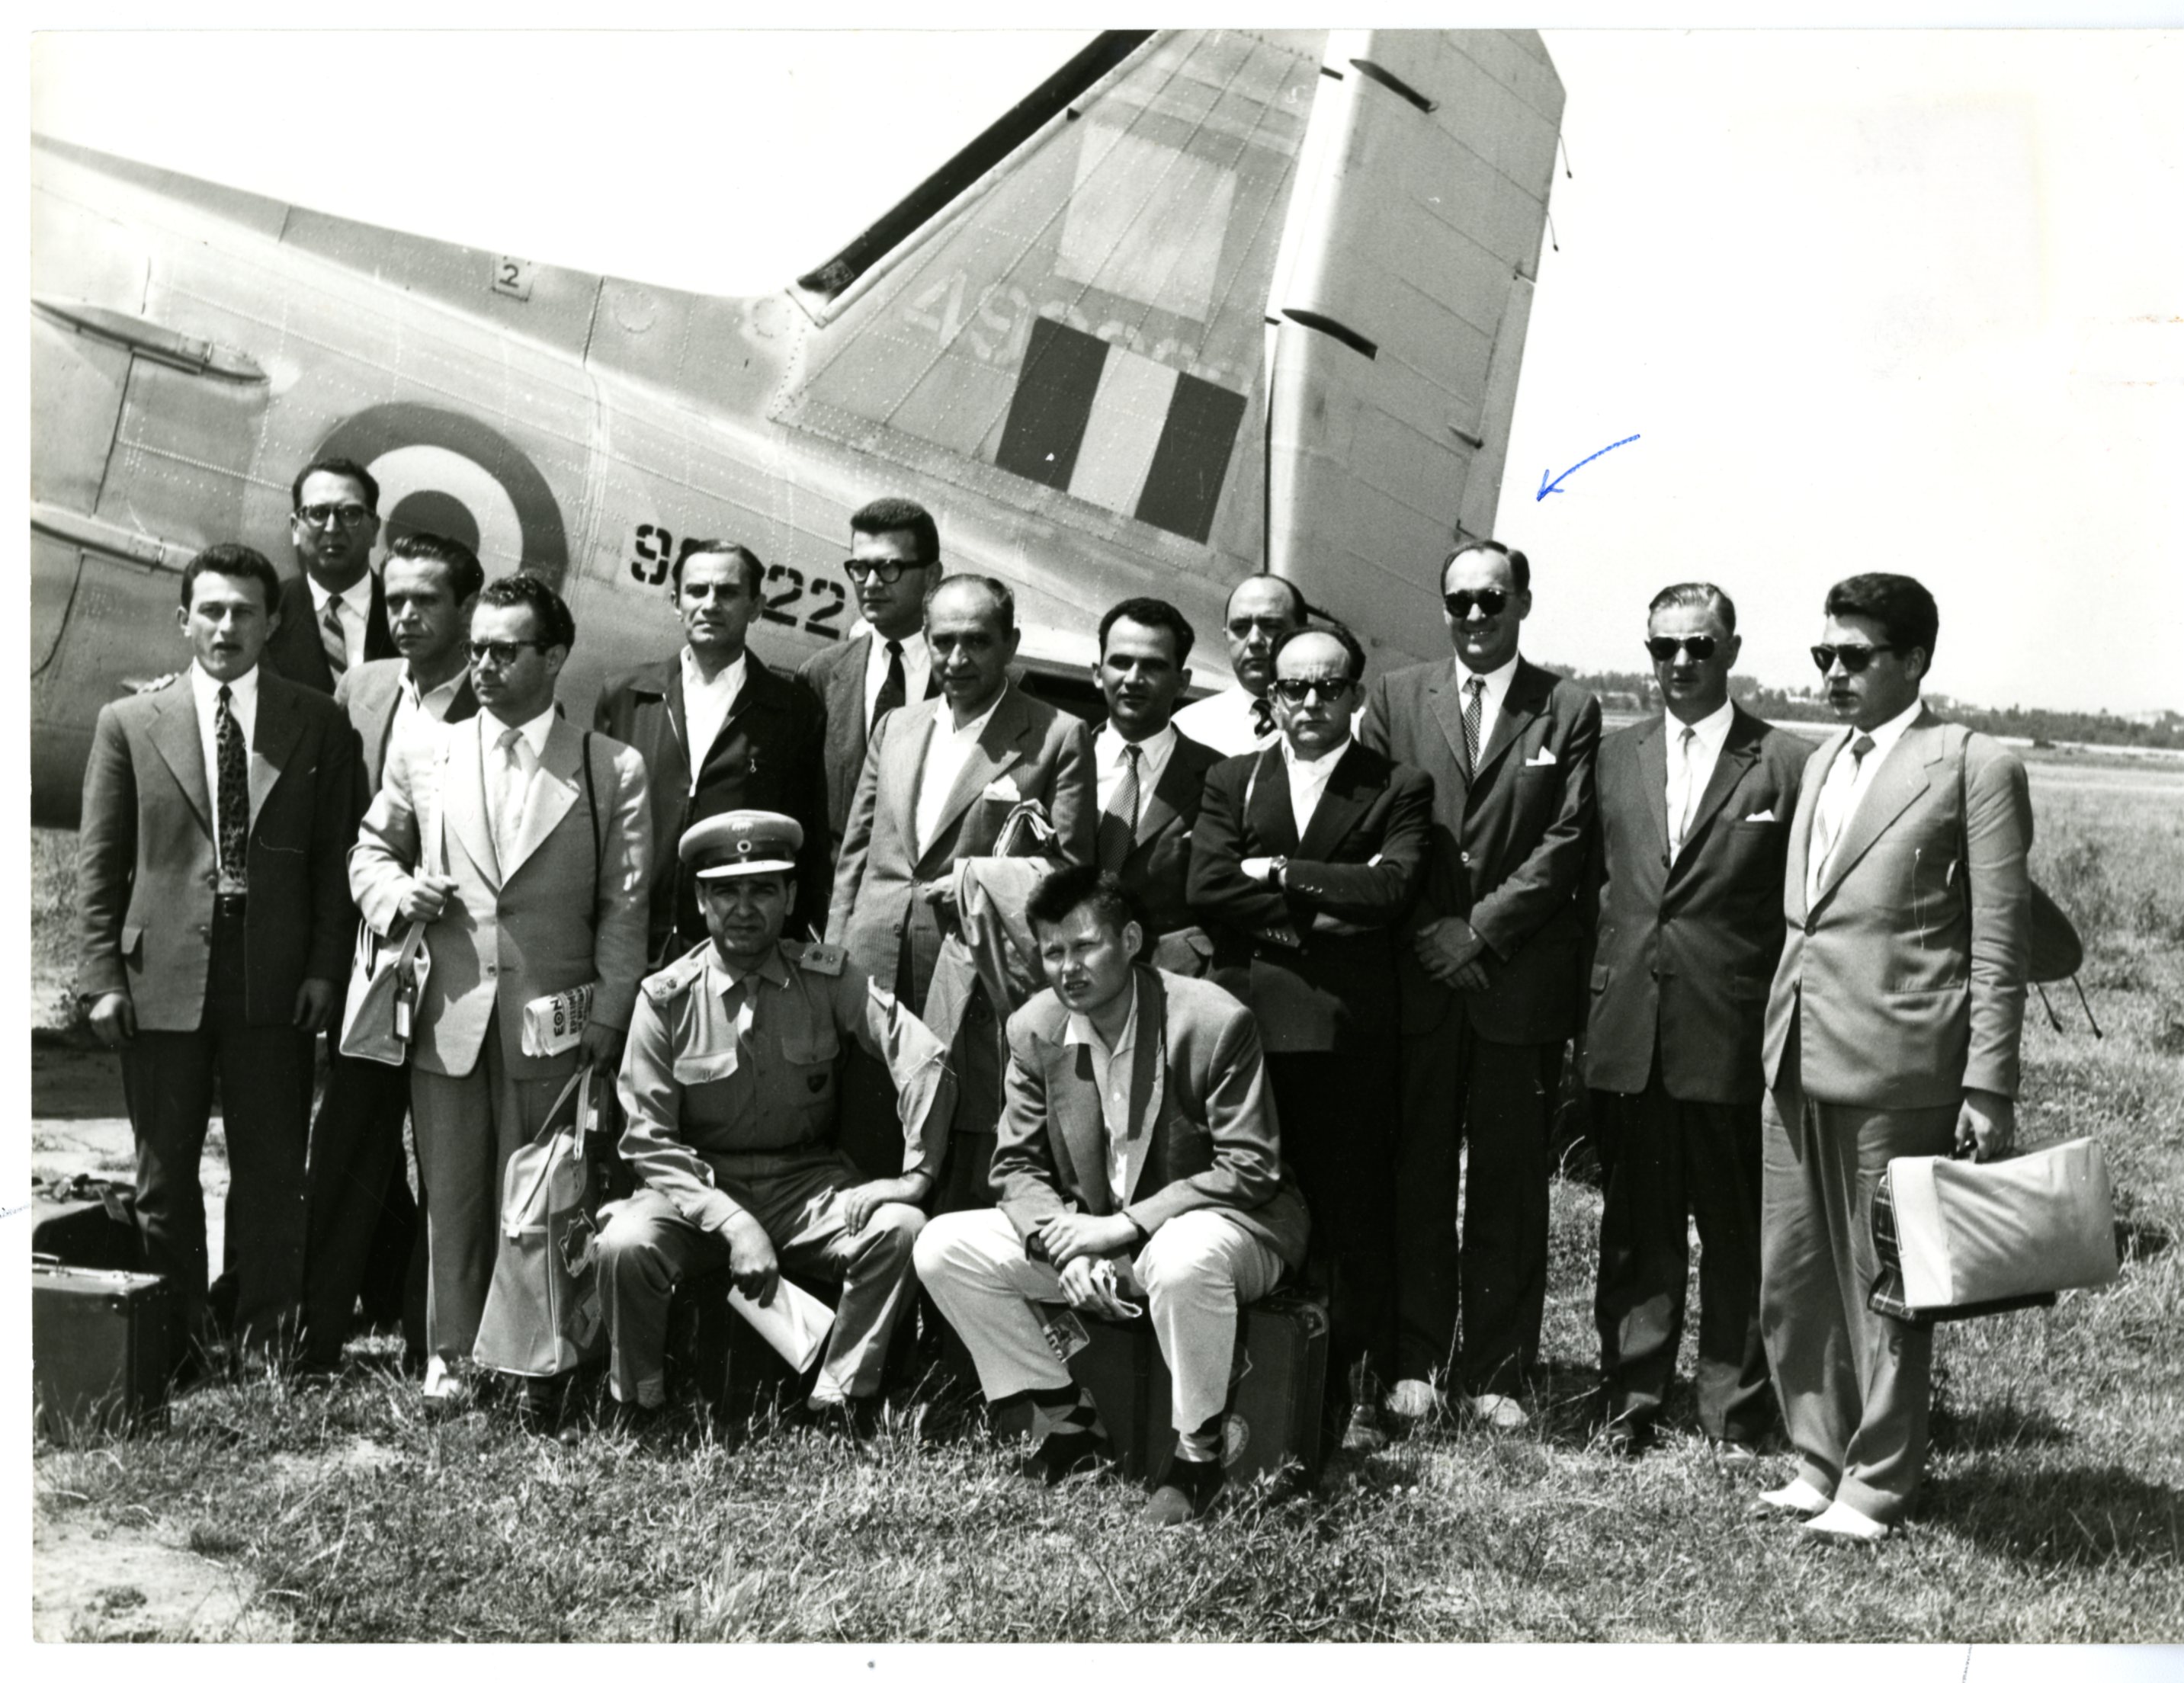 Robert de Treville Lawrence (indicated with blue arrow) poses with Greek journalists in 1958.